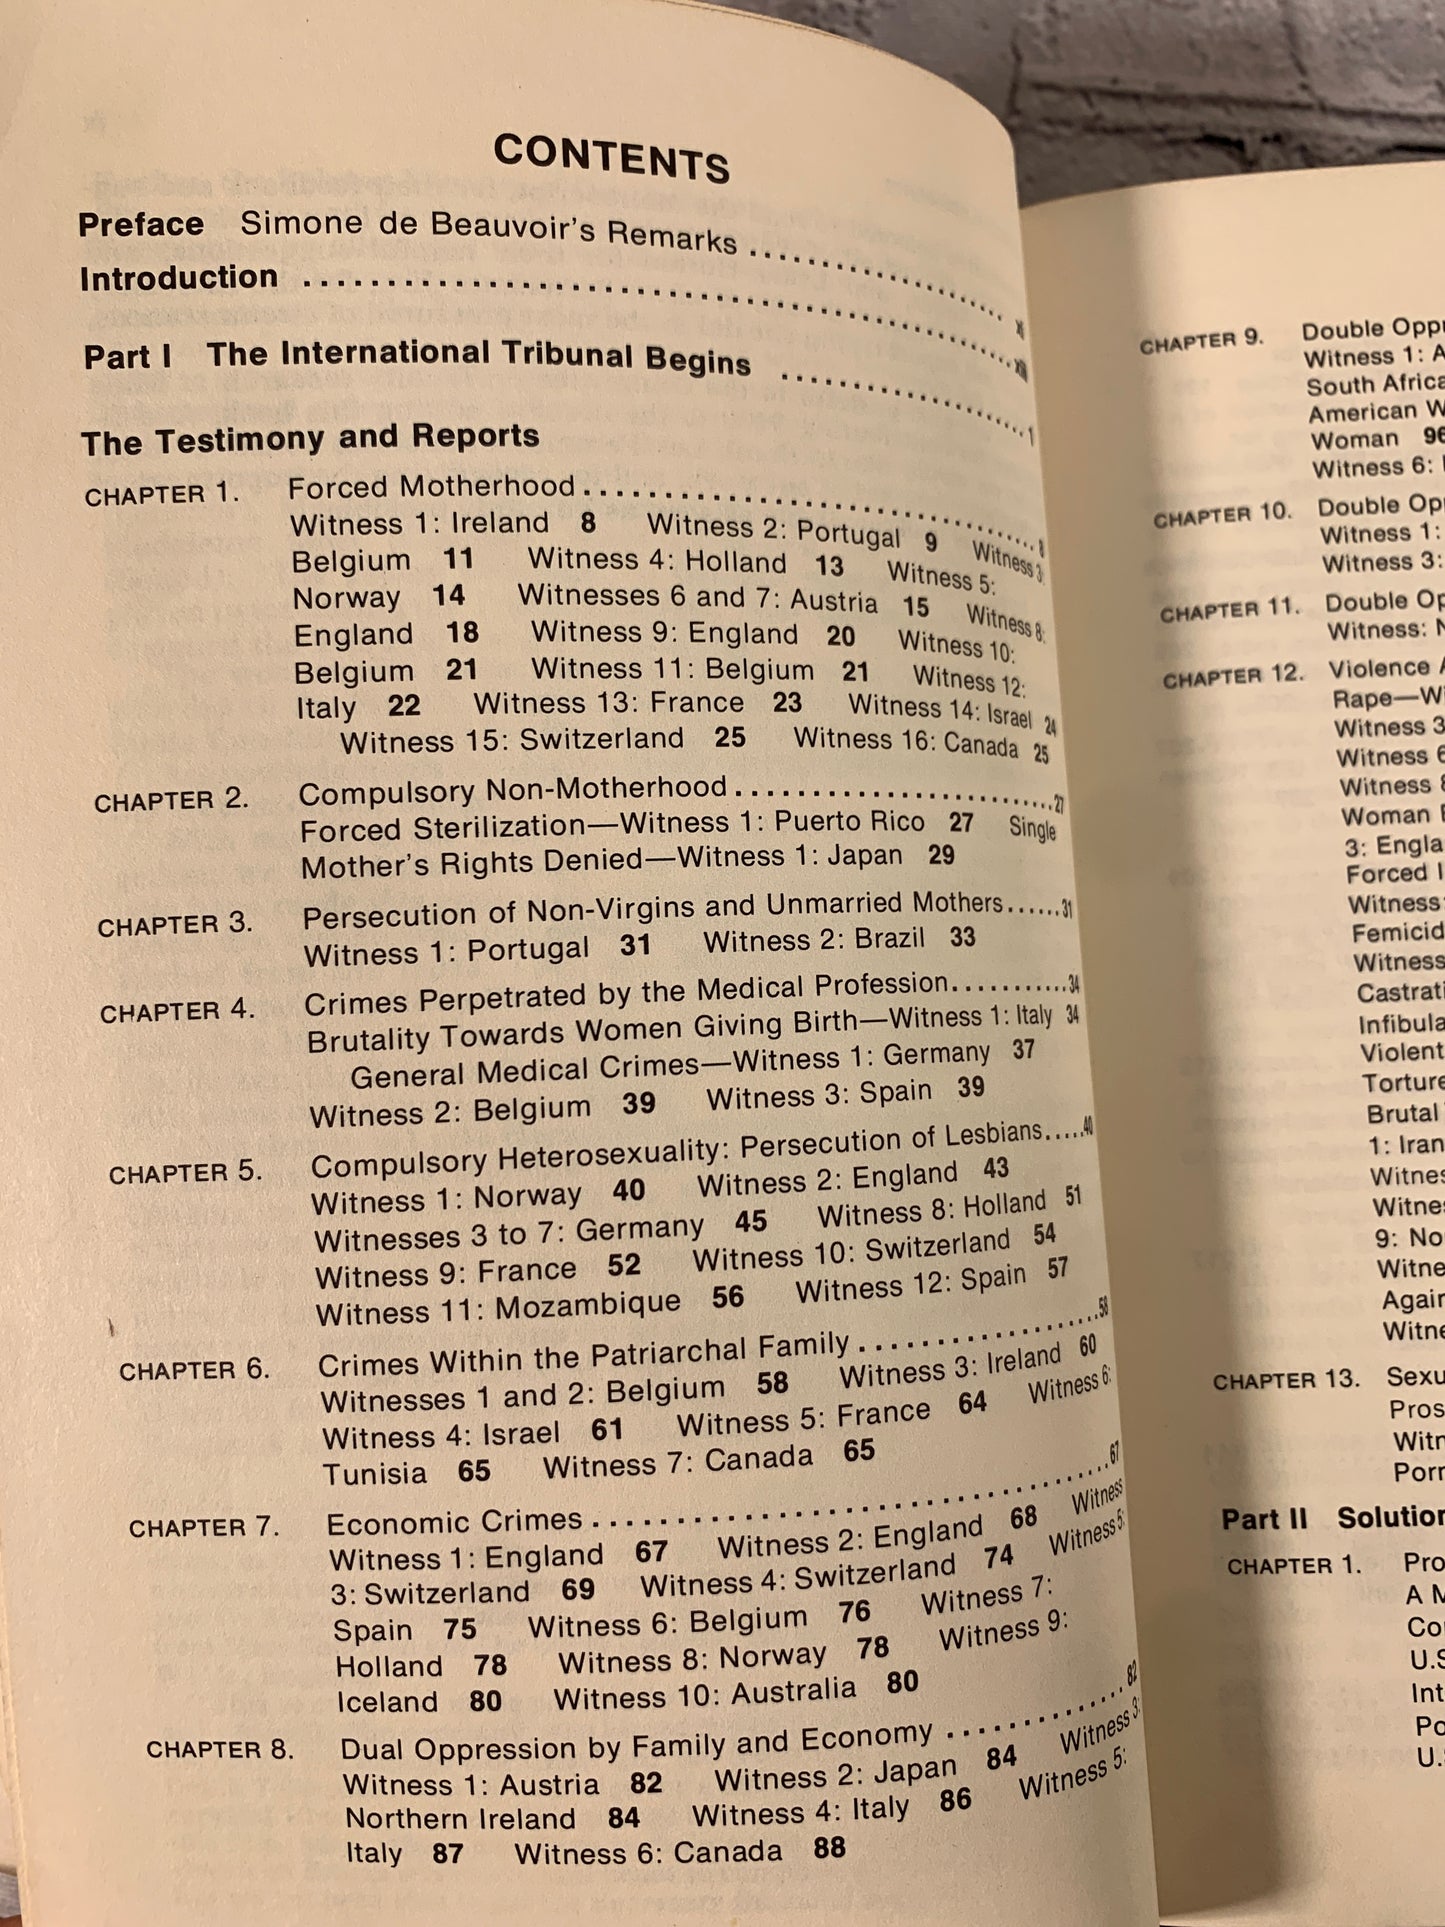 The Proceedings of the International Tribunal on Crimes Against Women [1976]